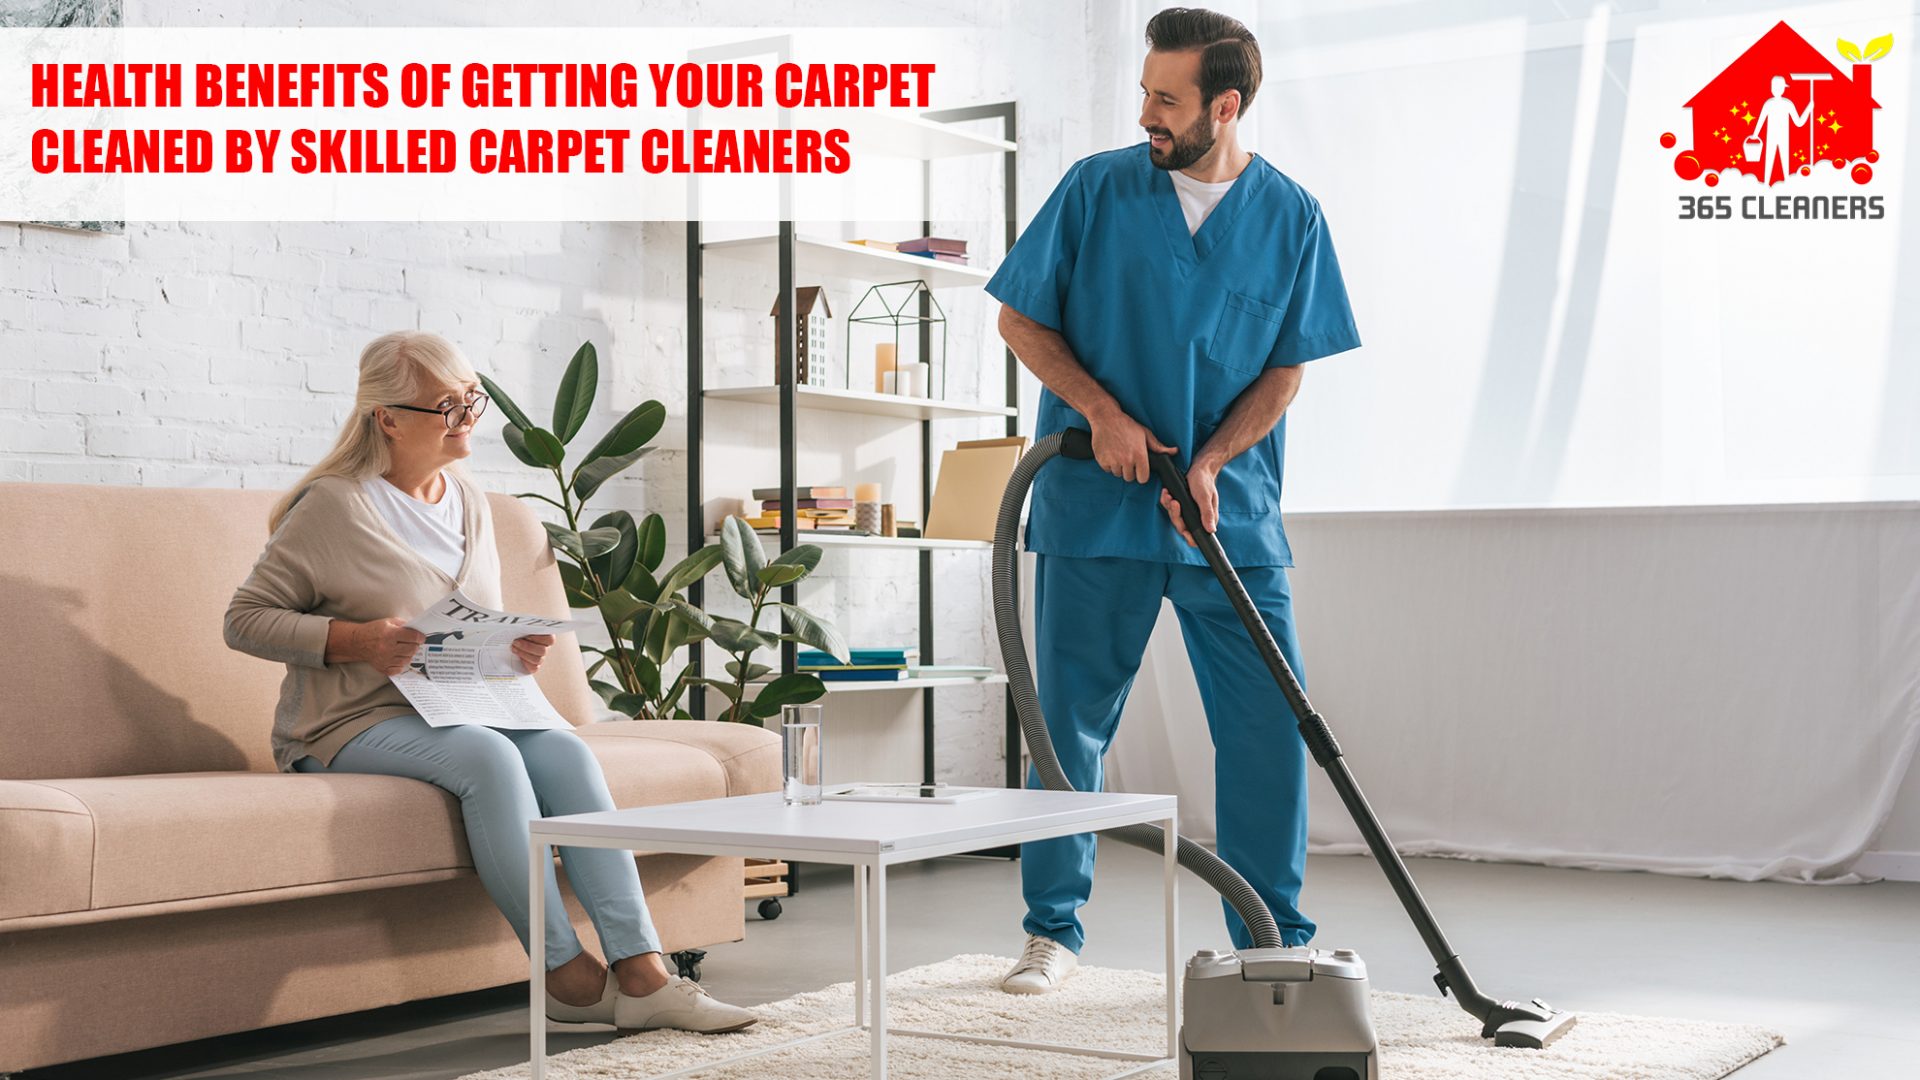 Carpet Cleaning in homes with Kids and Seniors